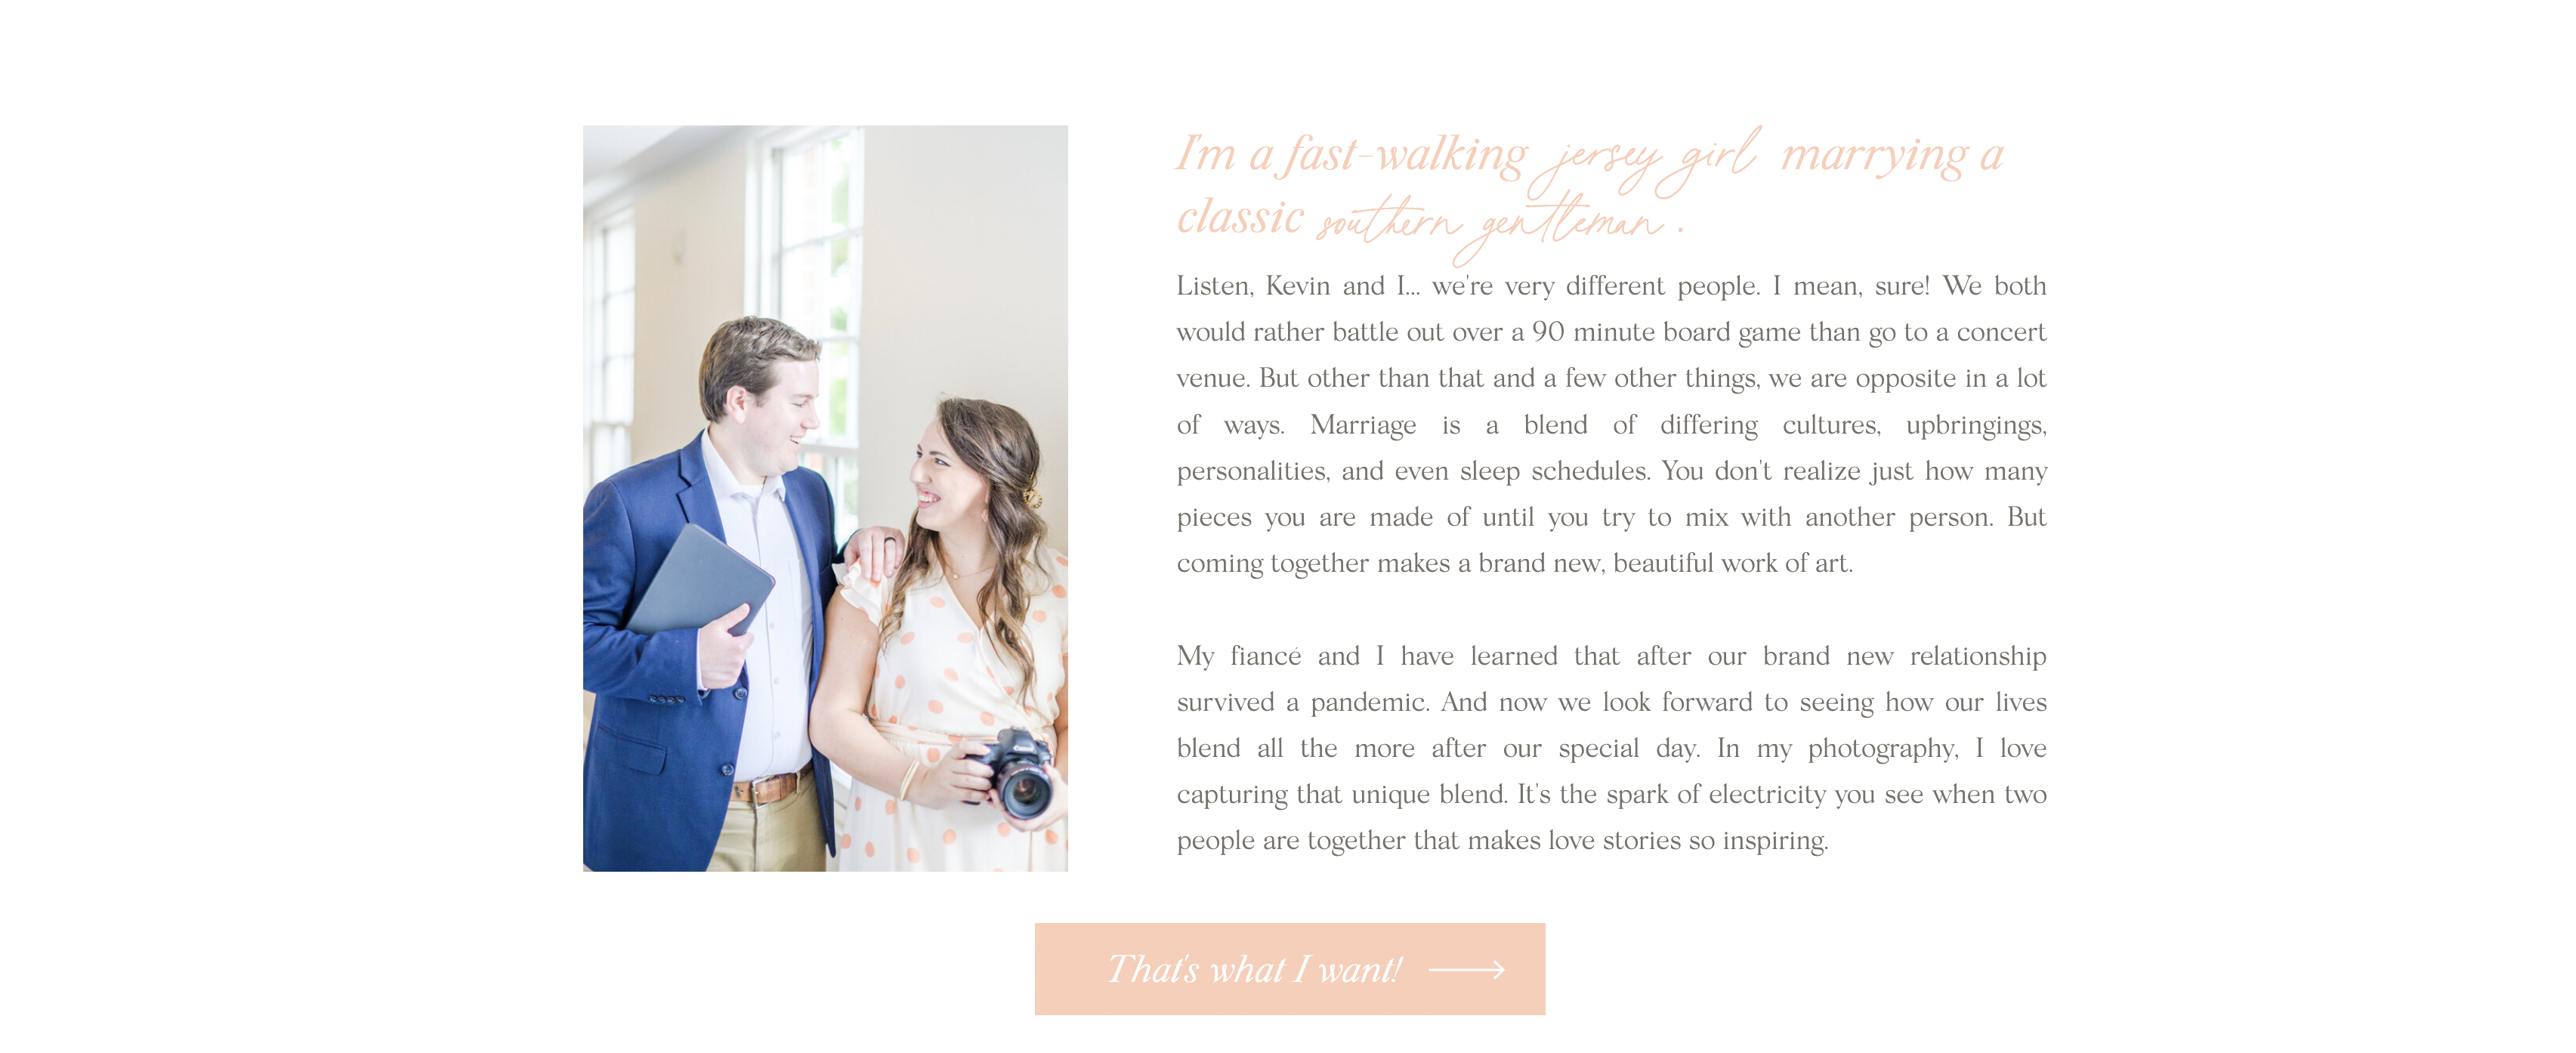 Sample of Emily Nicole Photography's website displayed with images from her Old Town Alexandria Branding session photographed by Cait Kramer Photography